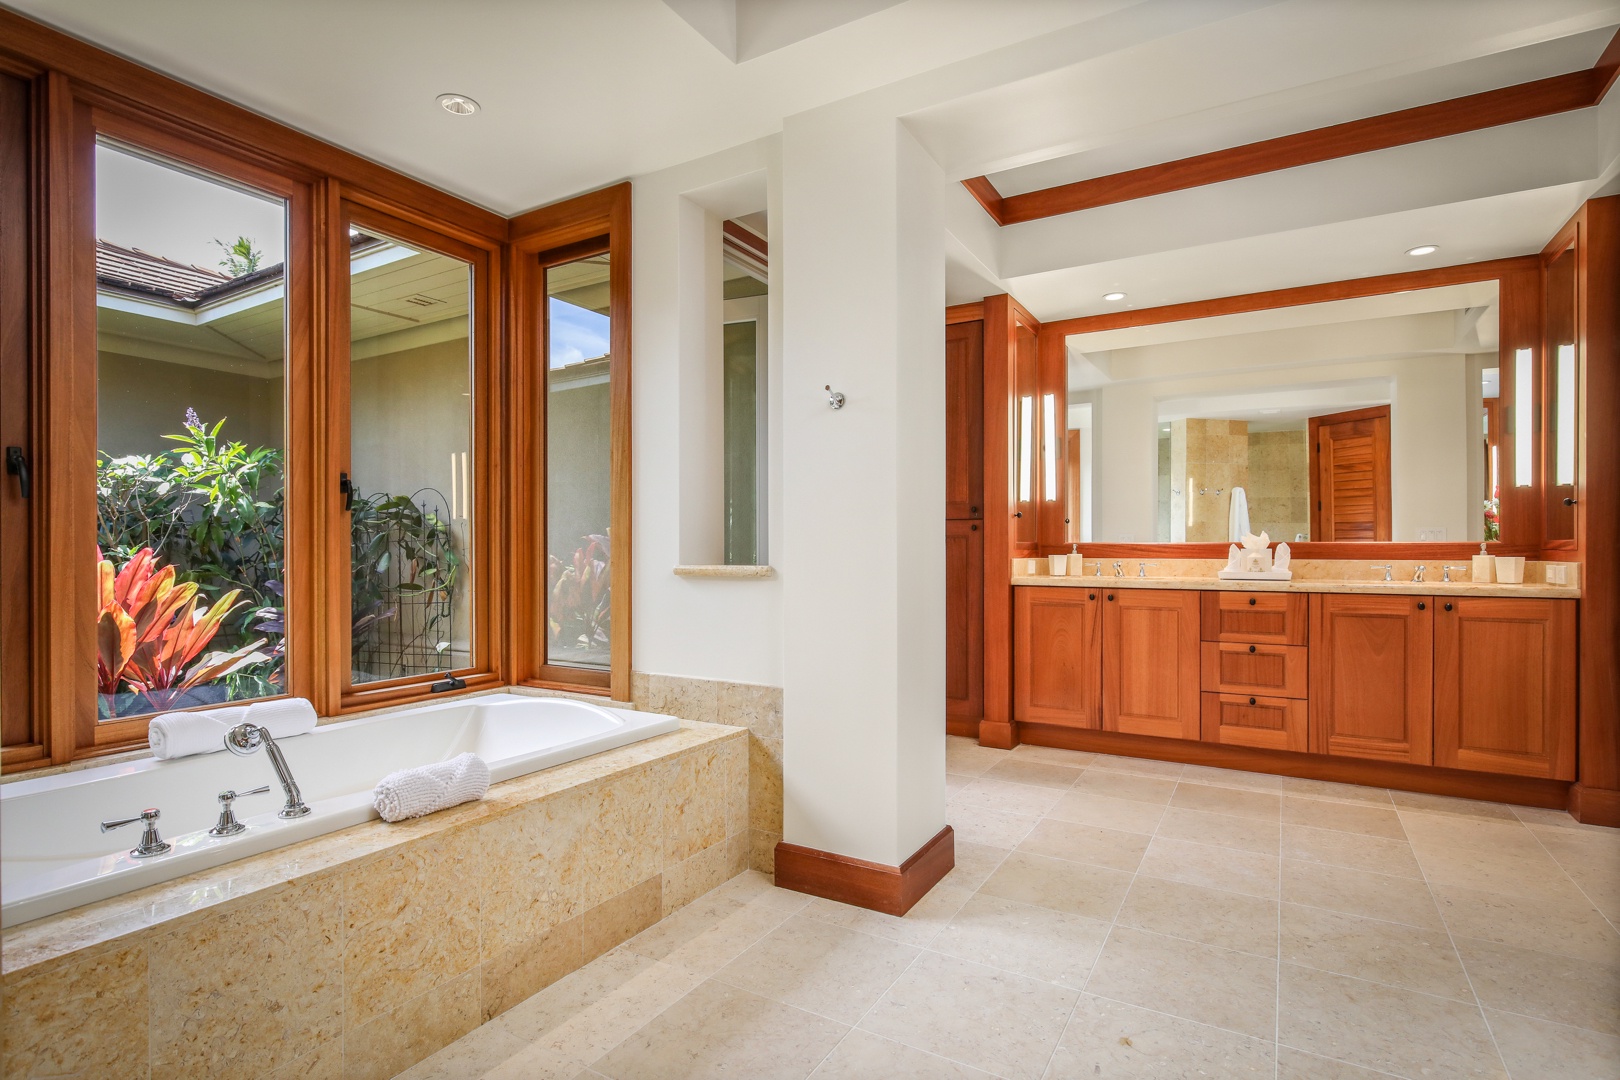 Kailua Kona Vacation Rentals, 4BD Hainoa Estate (122) at Four Seasons Resort at Hualalai - Primary bath with oversized soaking tub, dual vanity, walk-in shower, and outdoor shower garden.